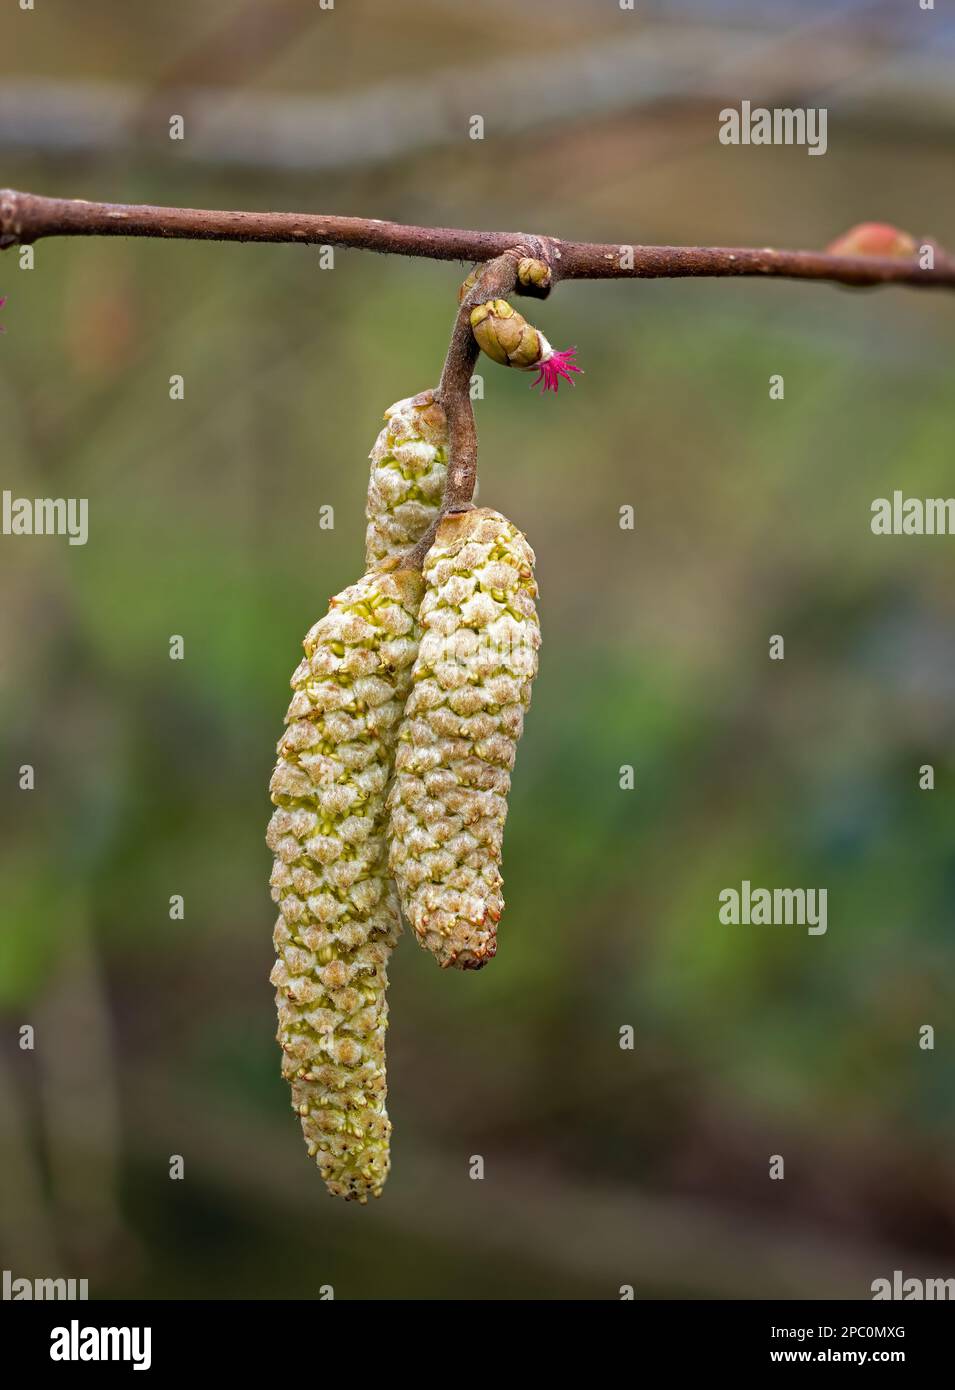 Common Hazel tree showing Male Catkin Flowers and Female Flower Stock Photo